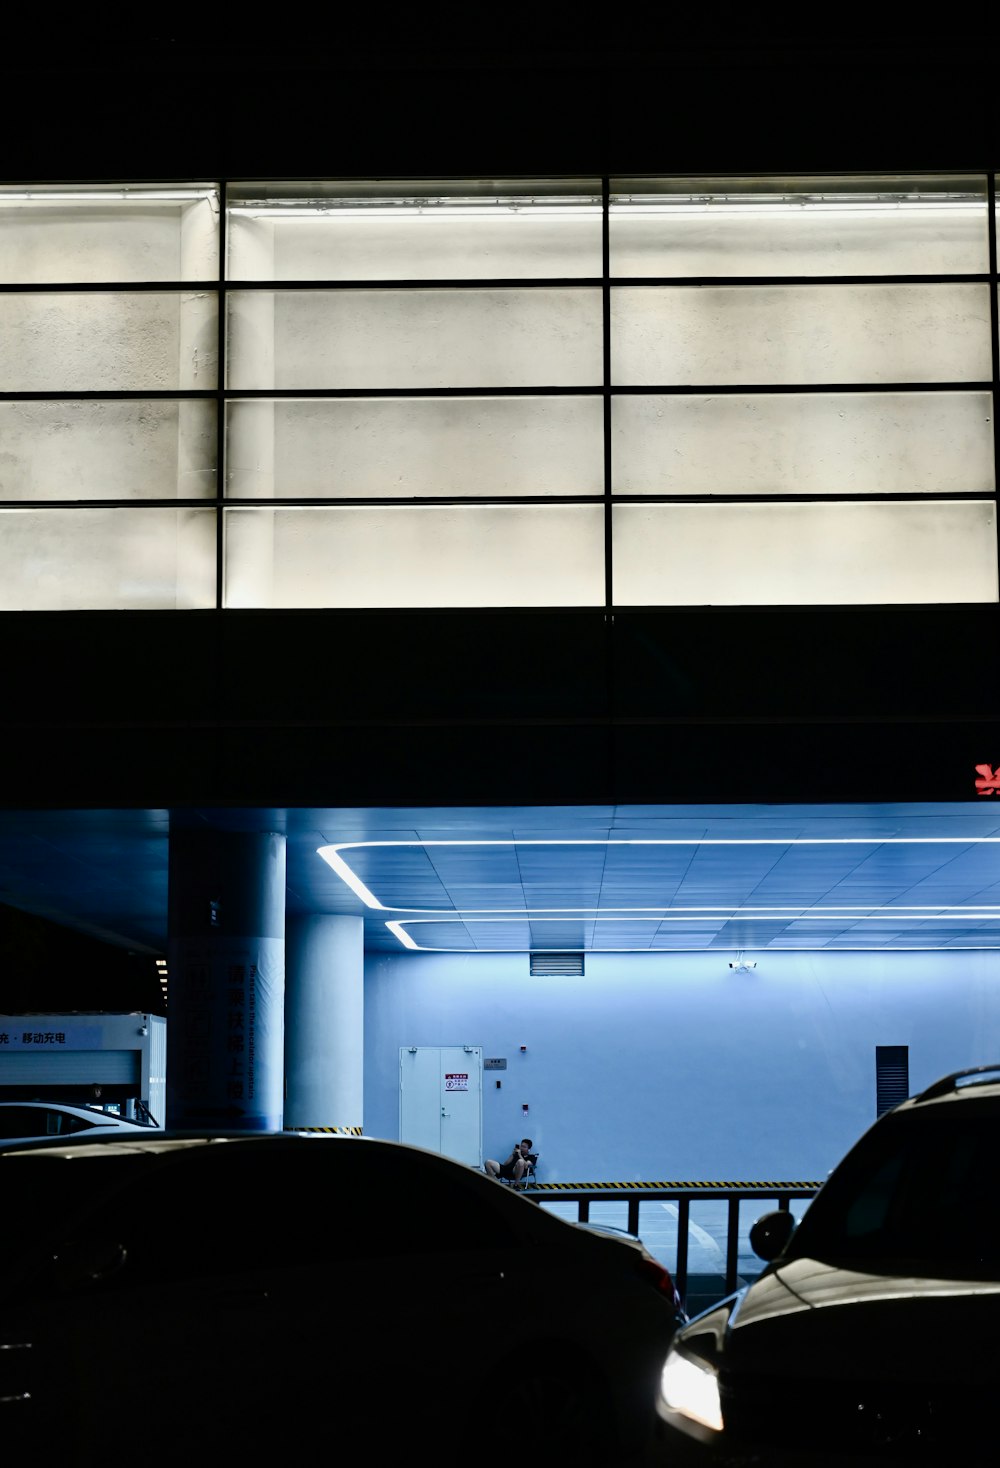 two cars parked in a parking garage at night